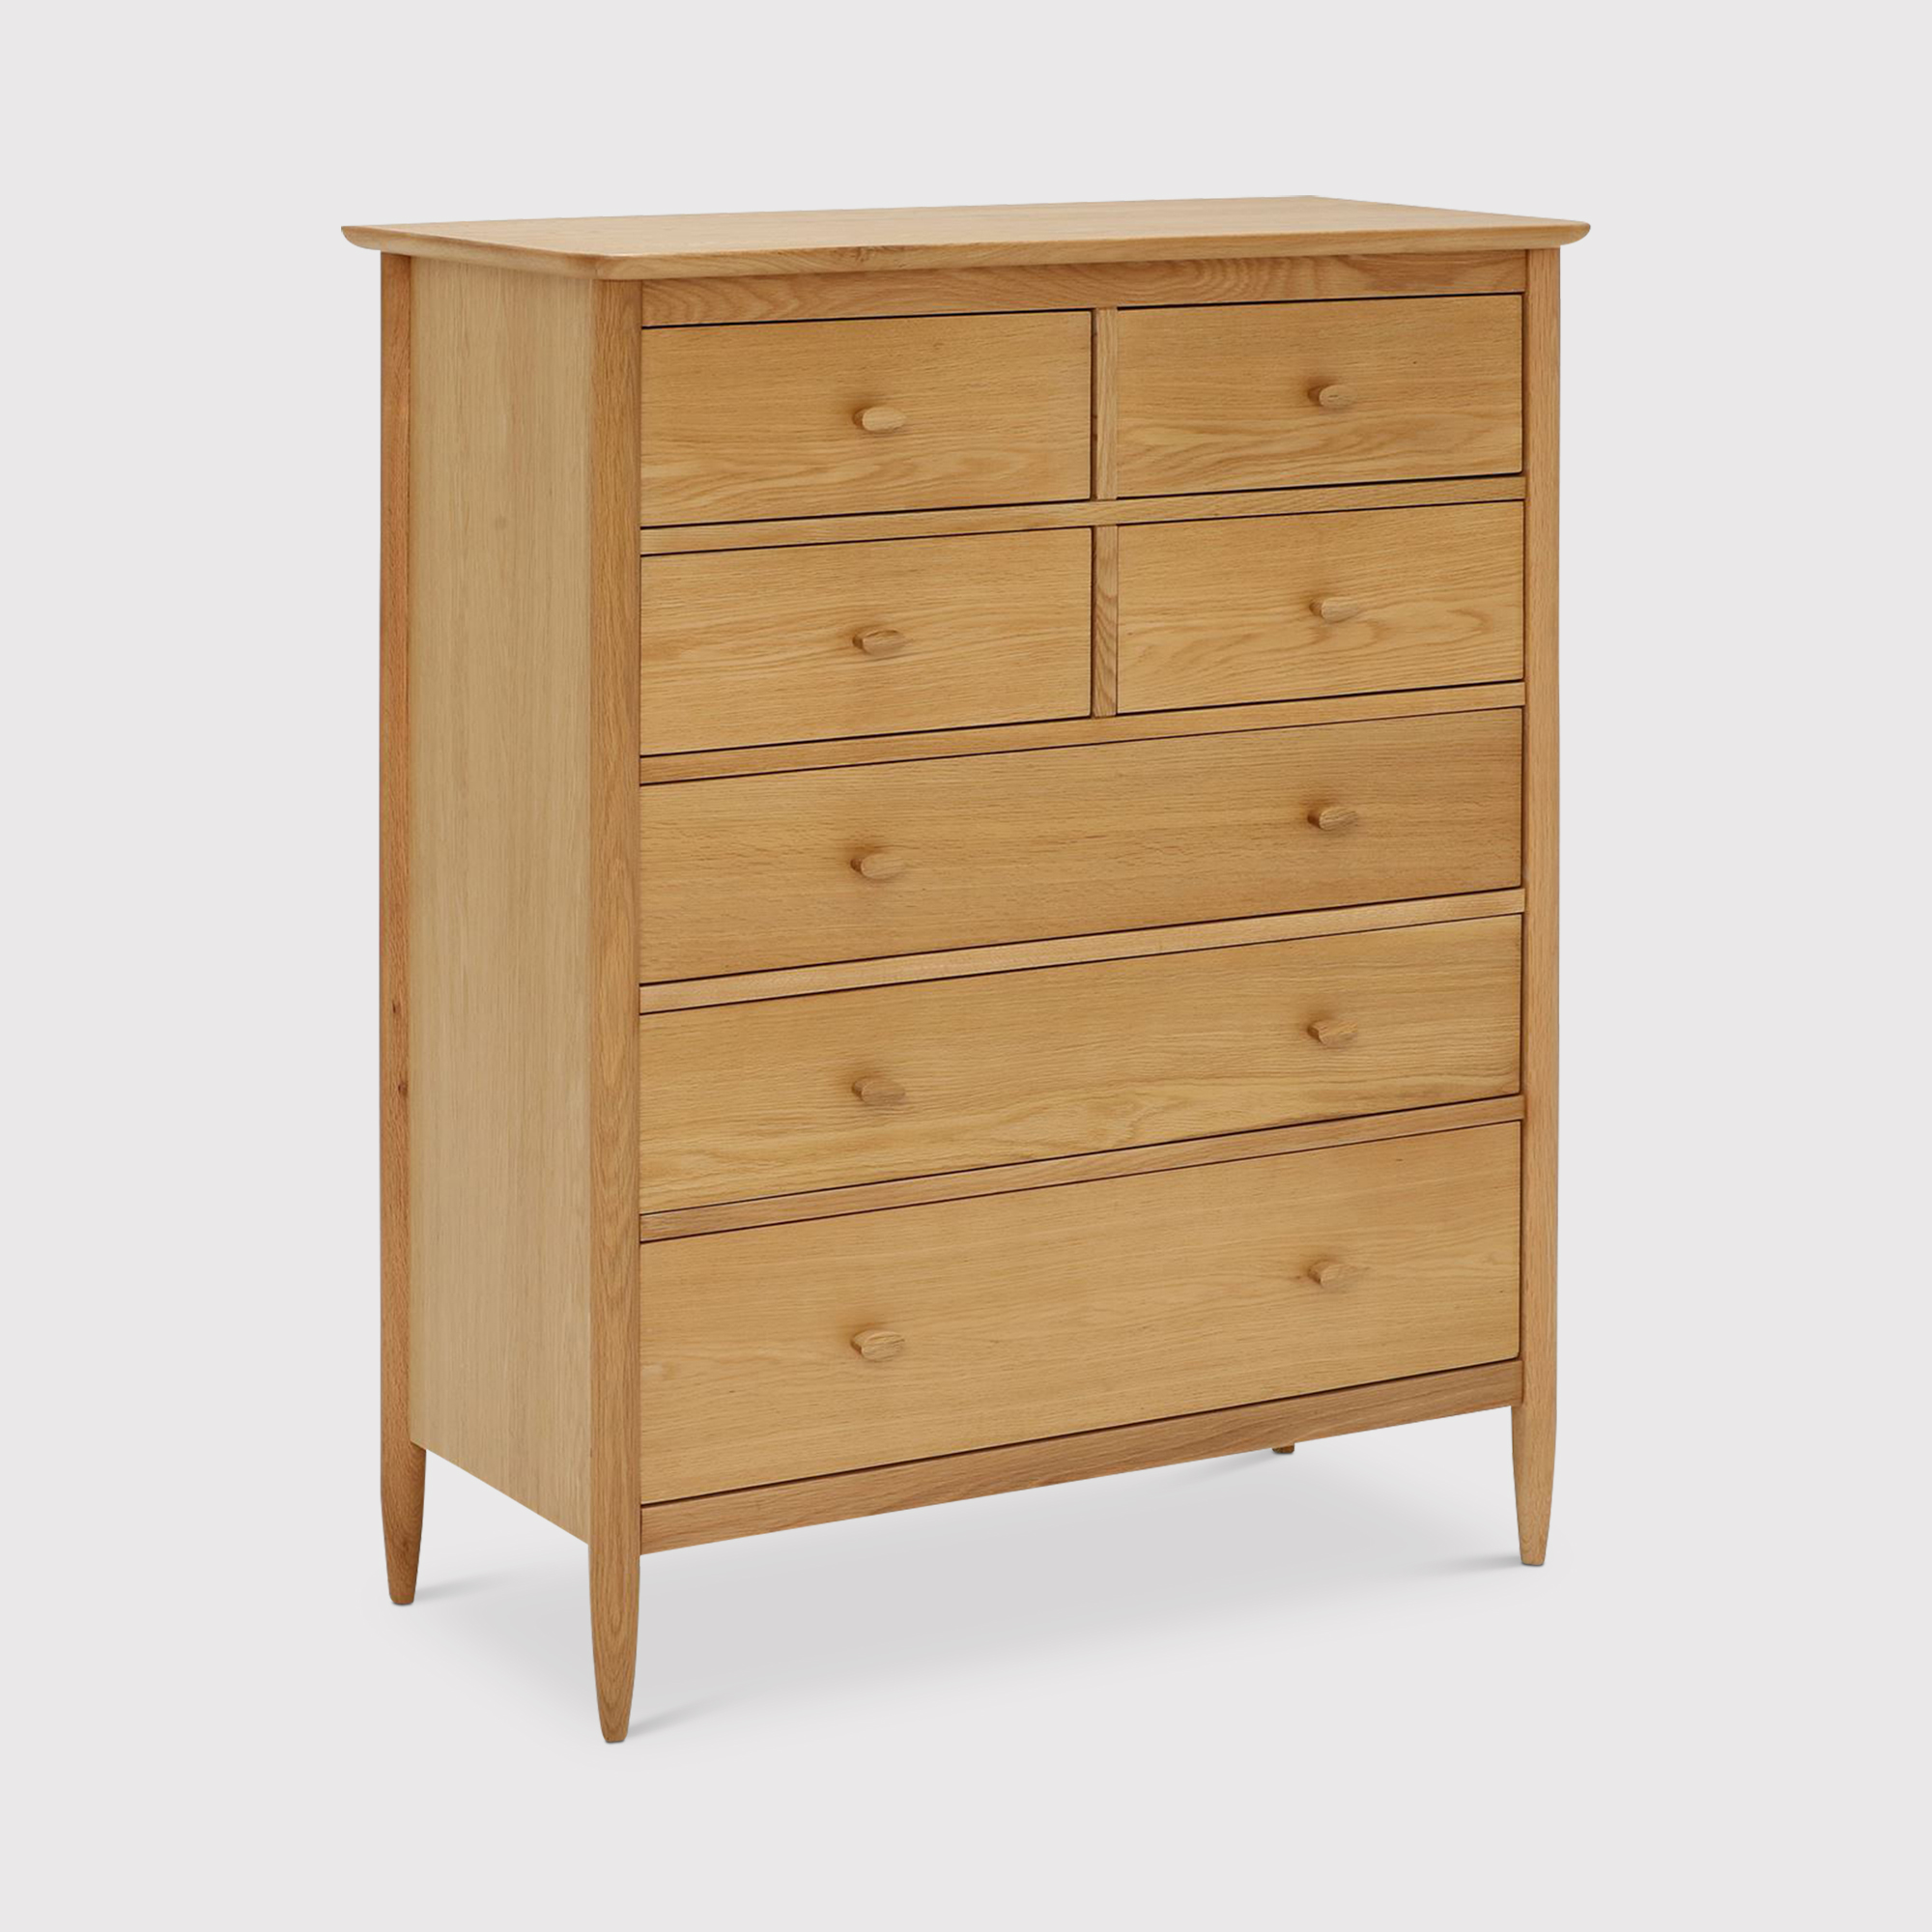 Ercol Teramo 7 Drawer Tall Wide Chest, Neutral | Barker & Stonehouse